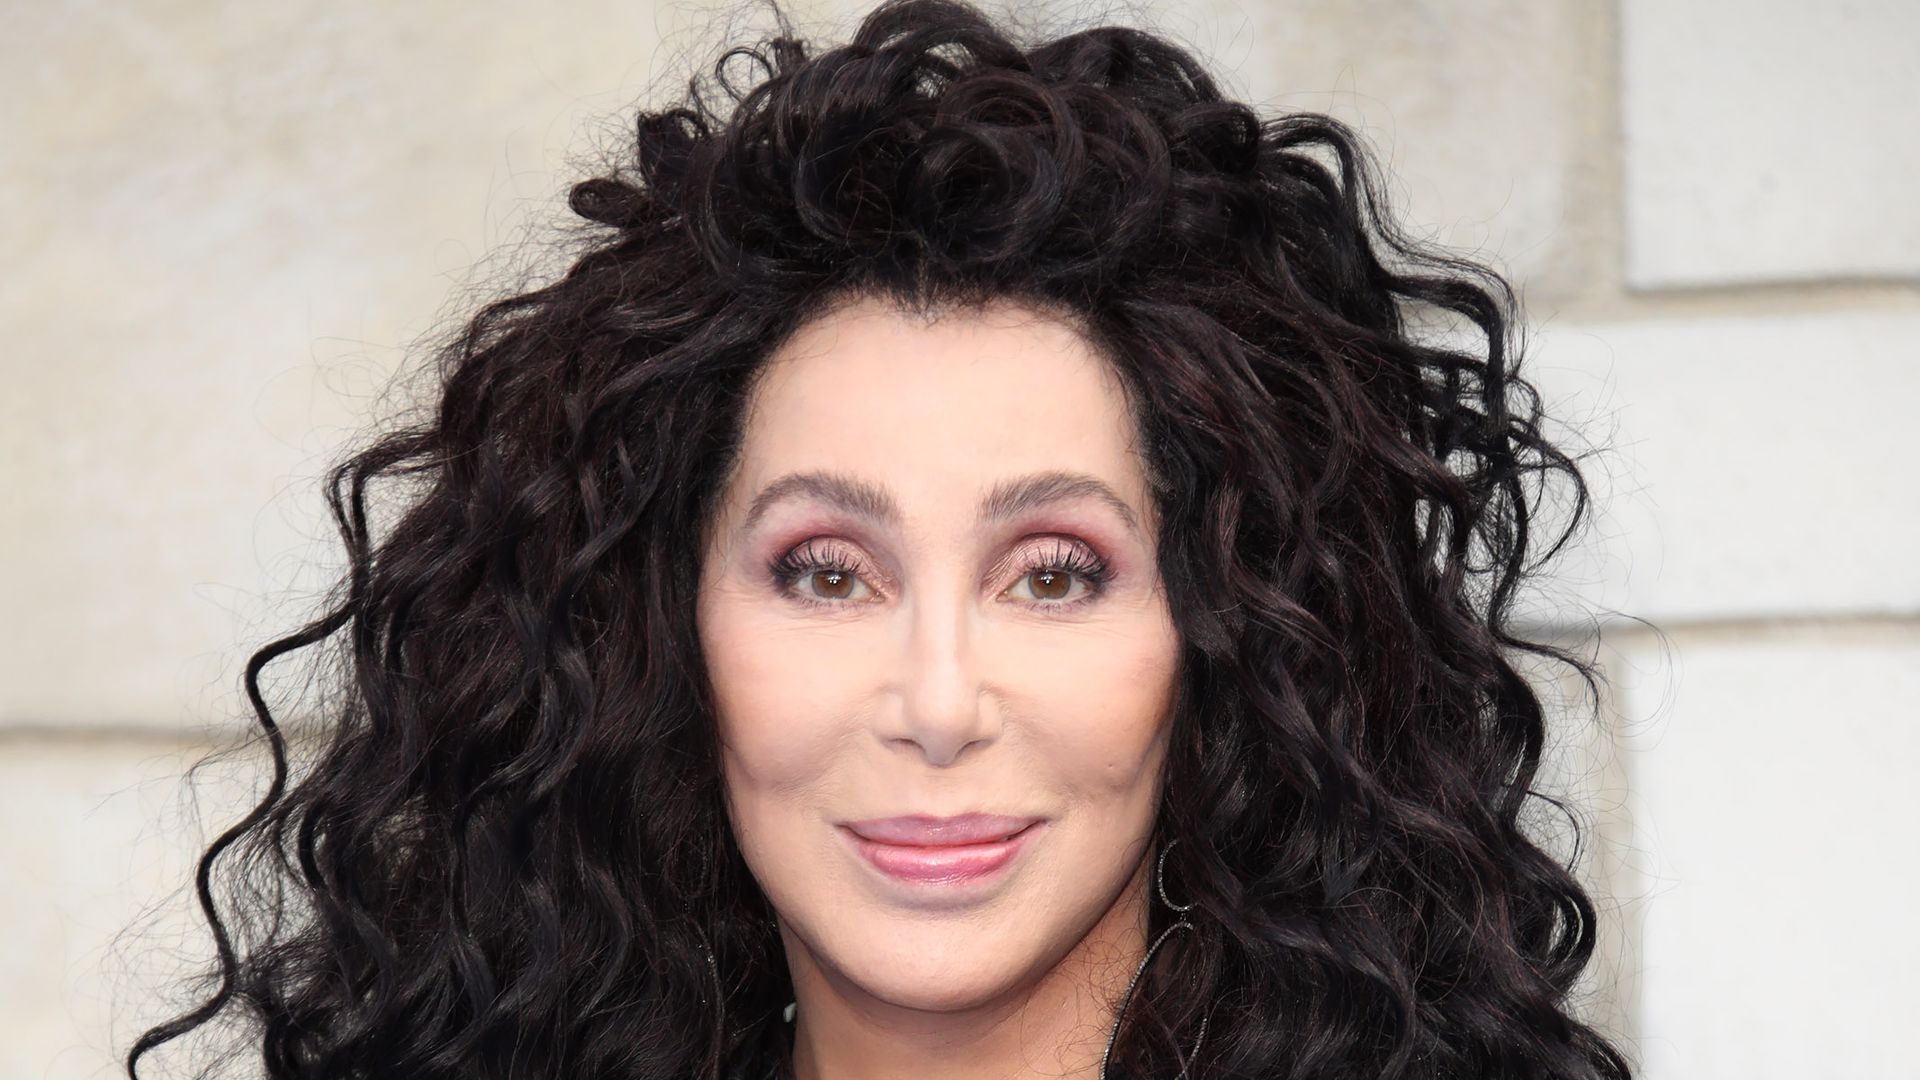 Cher smiling with her hair in tight curls 